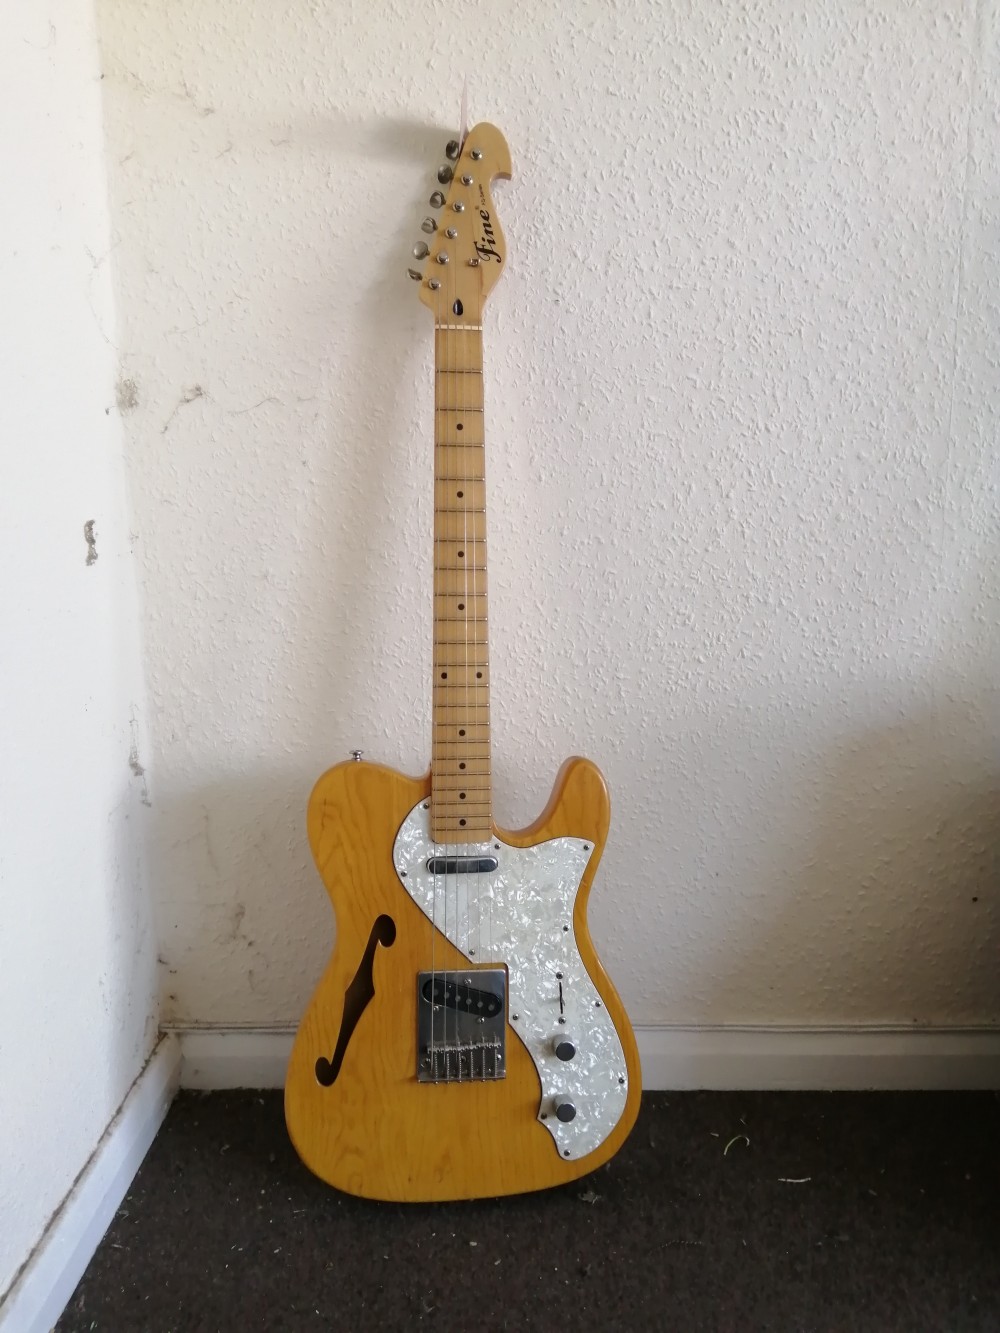 A Fine FS-Series Telecaster style electric guitar